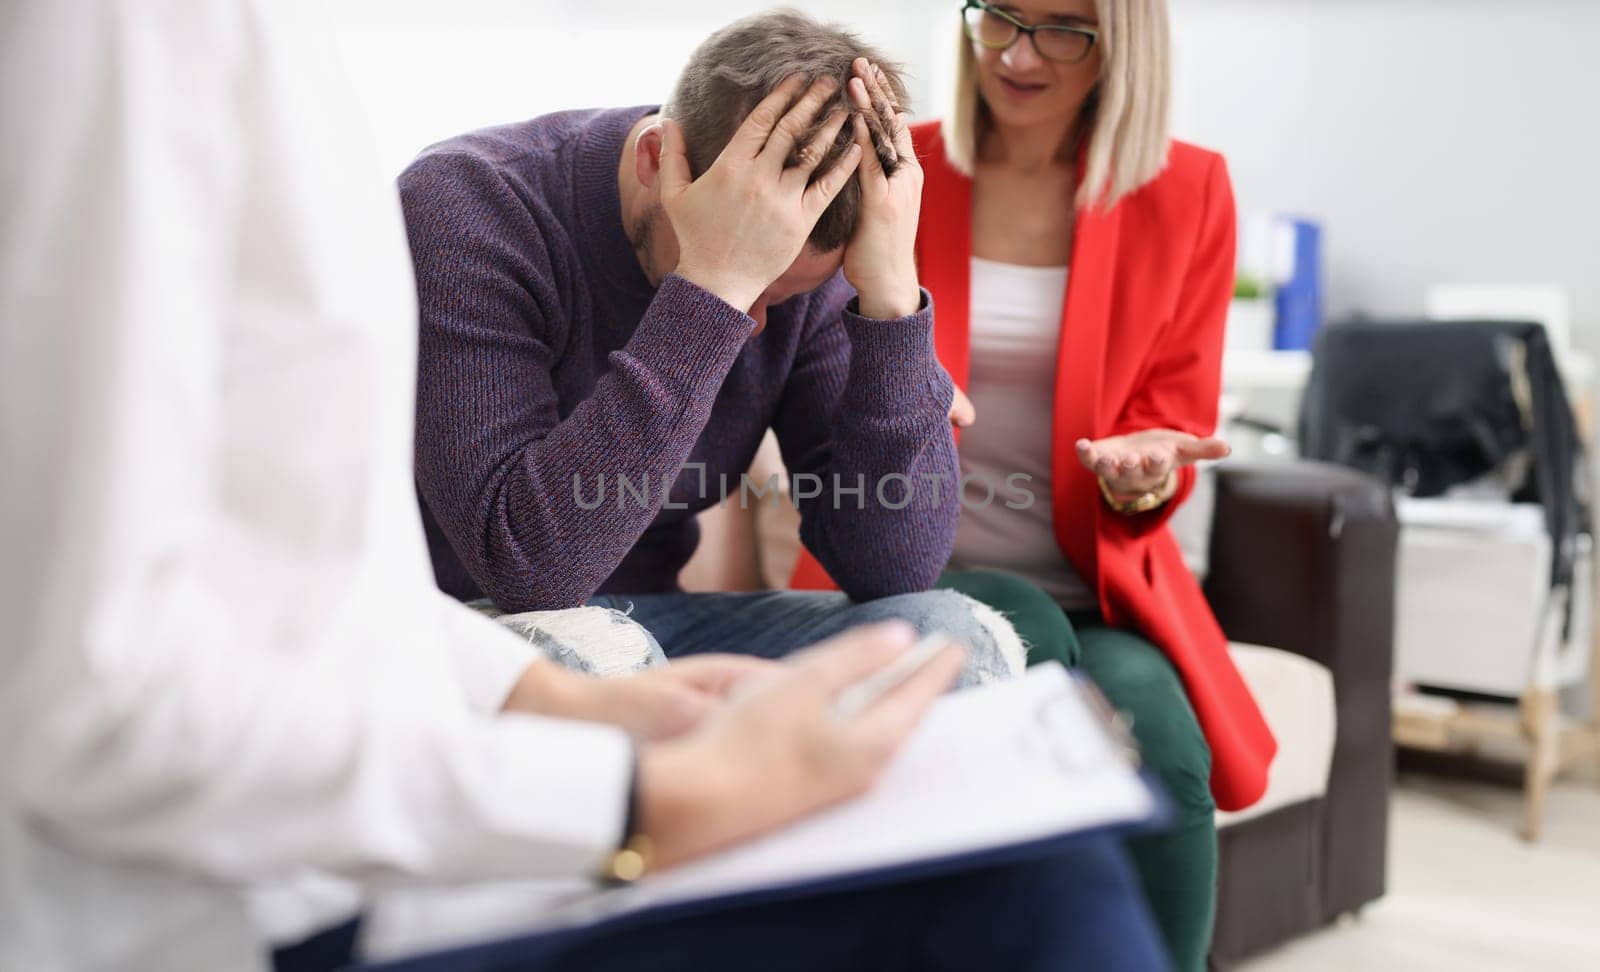 Upset man with woman at psychotherapist appointment. Psychological help in family relationships concept